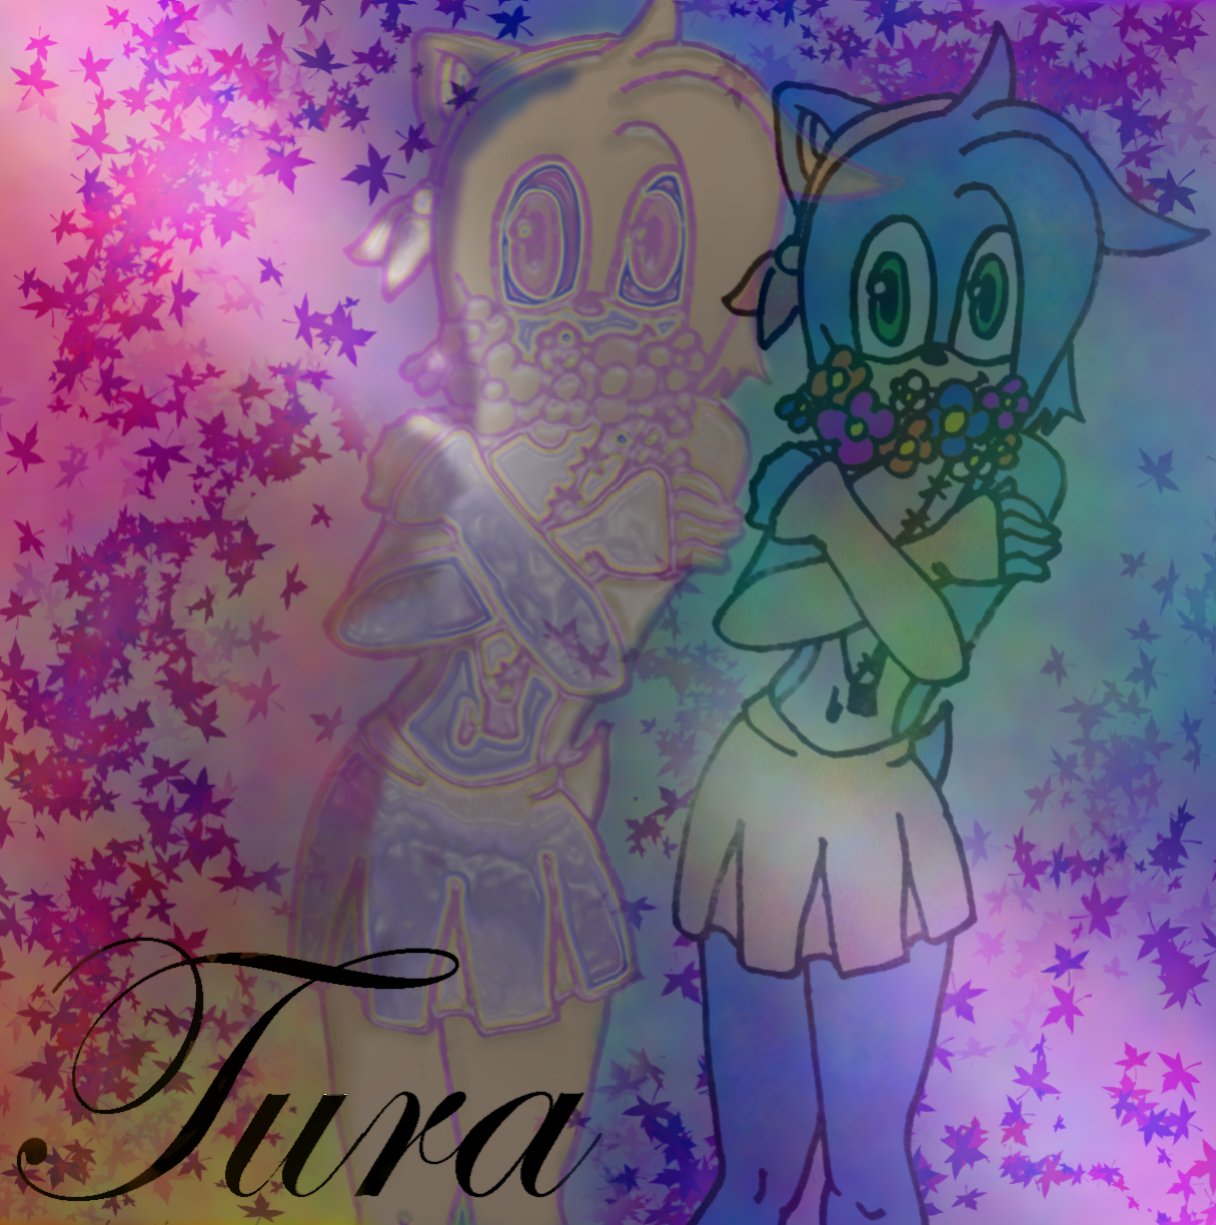 Tura Wallpaper for contest by DemonessDarkFlame